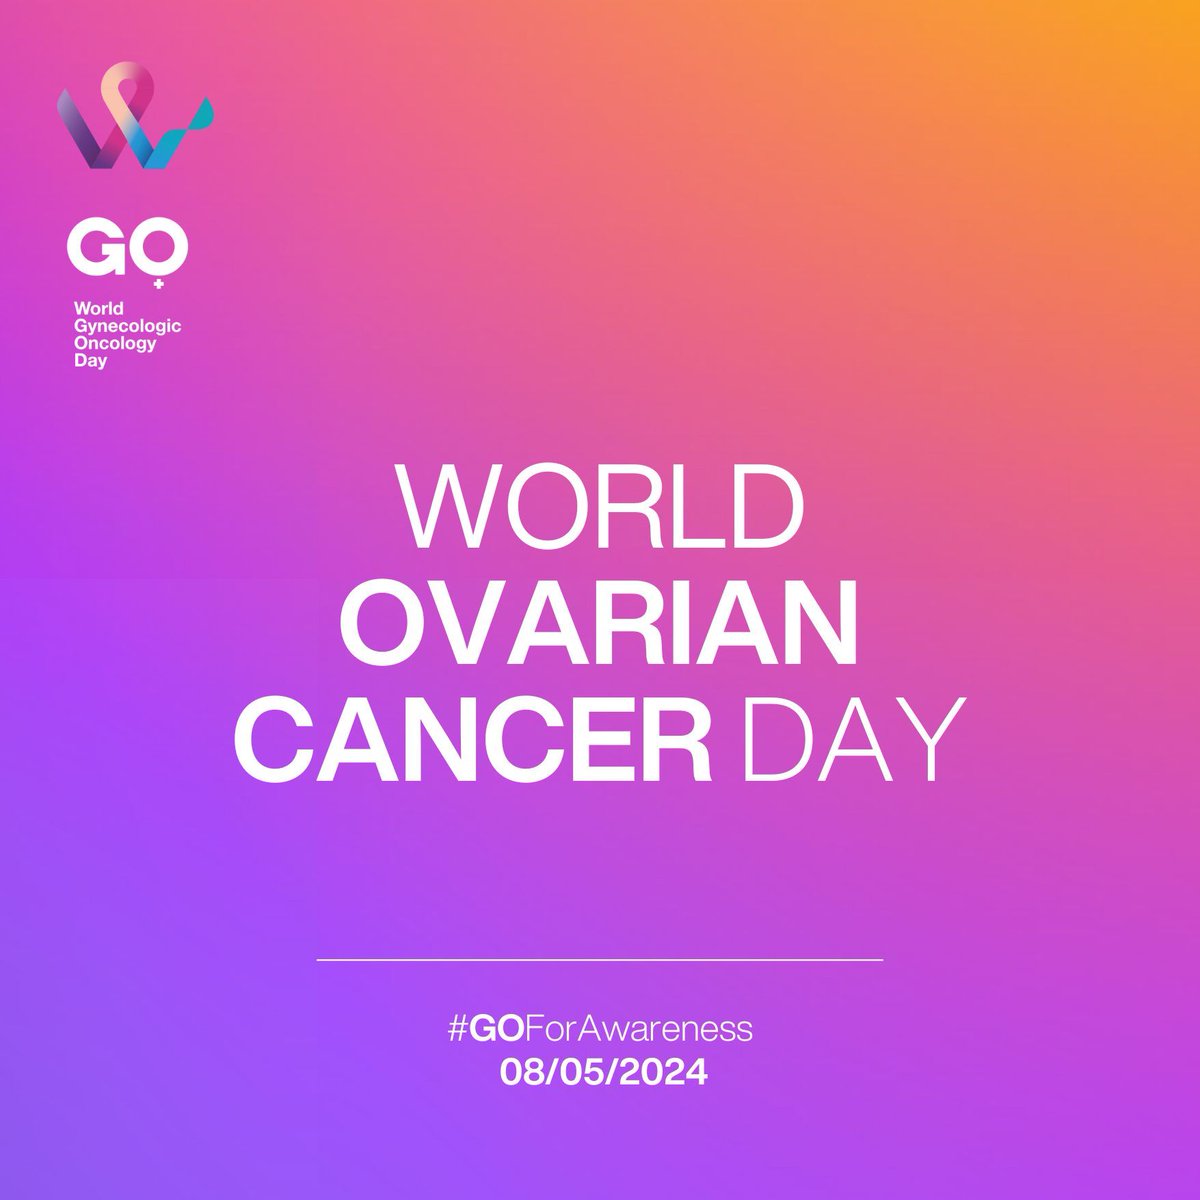 Today is World Ovarian Cancer Day! It’s the right time to learn about ovarian cancer 🩵 signs and symptoms 💙 risk factors 🩵 treatments For that and more, follow @OvCancerDay & browse the hashtags #NoWomanLeftBehind #WOCD2024 #WorldOvarianCancerDay